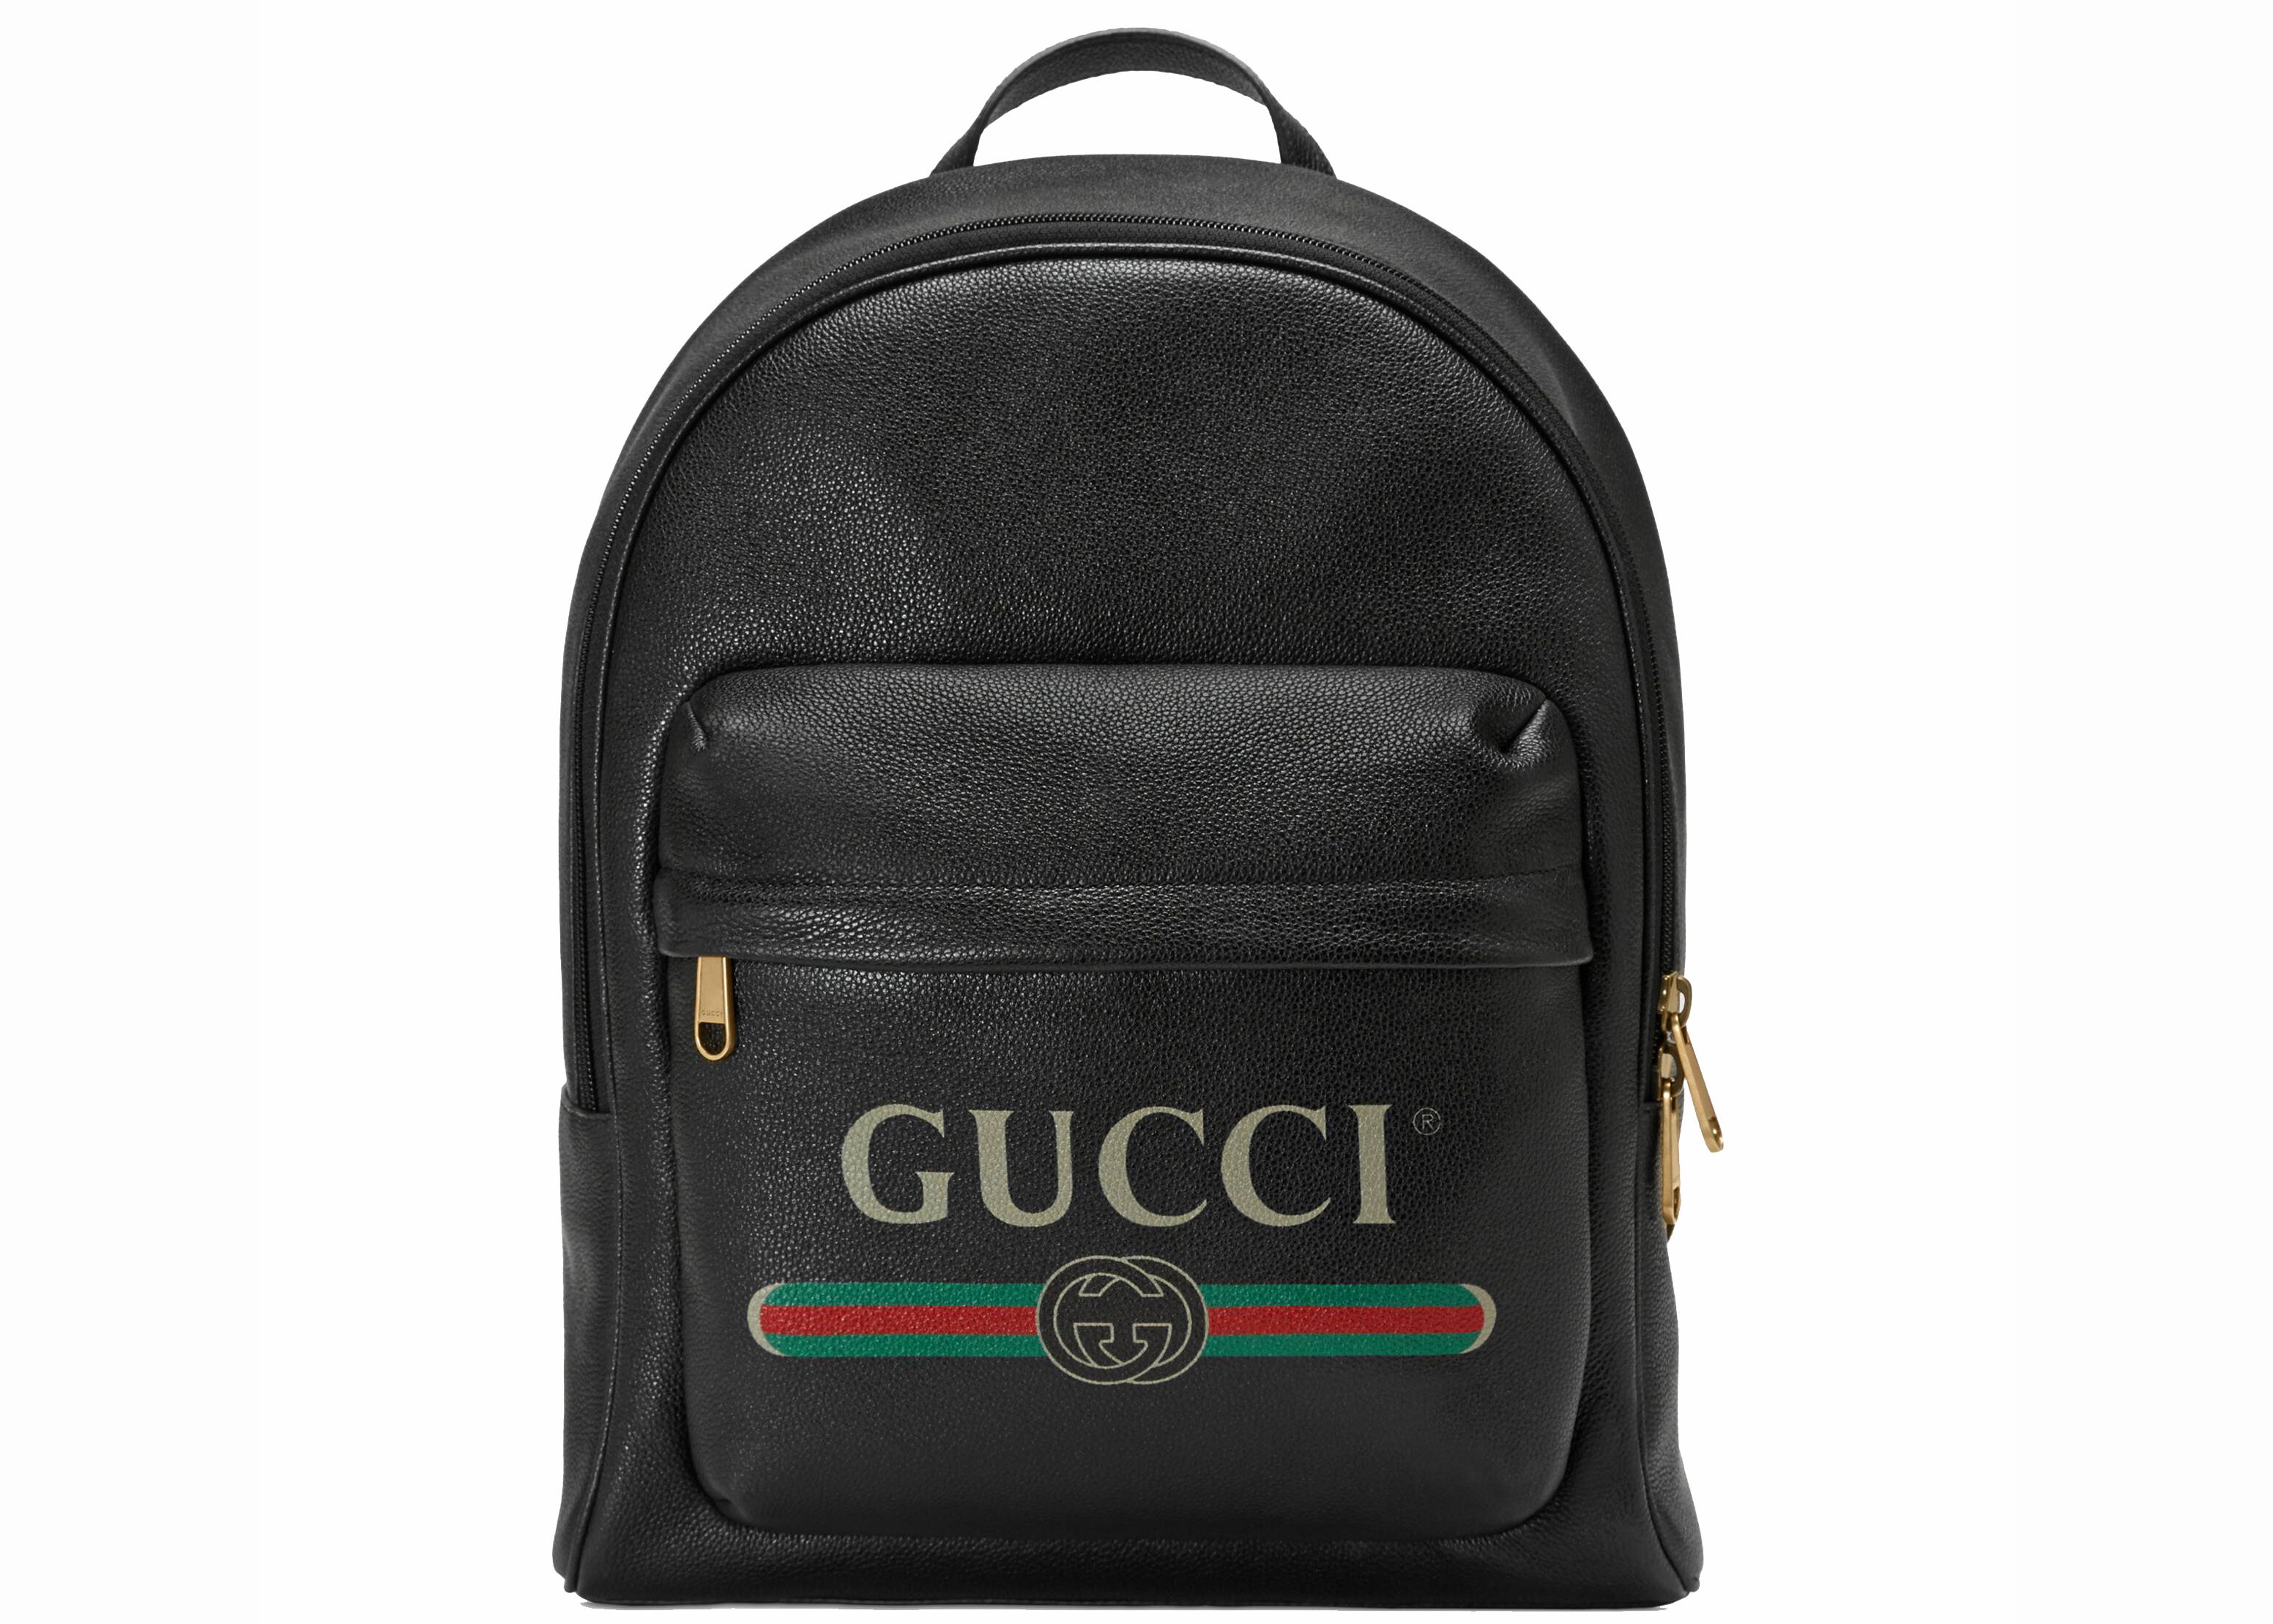 8 Coolest Gucci Backpacks to Invest In | Backpack outfit, Bags, Gucci bag